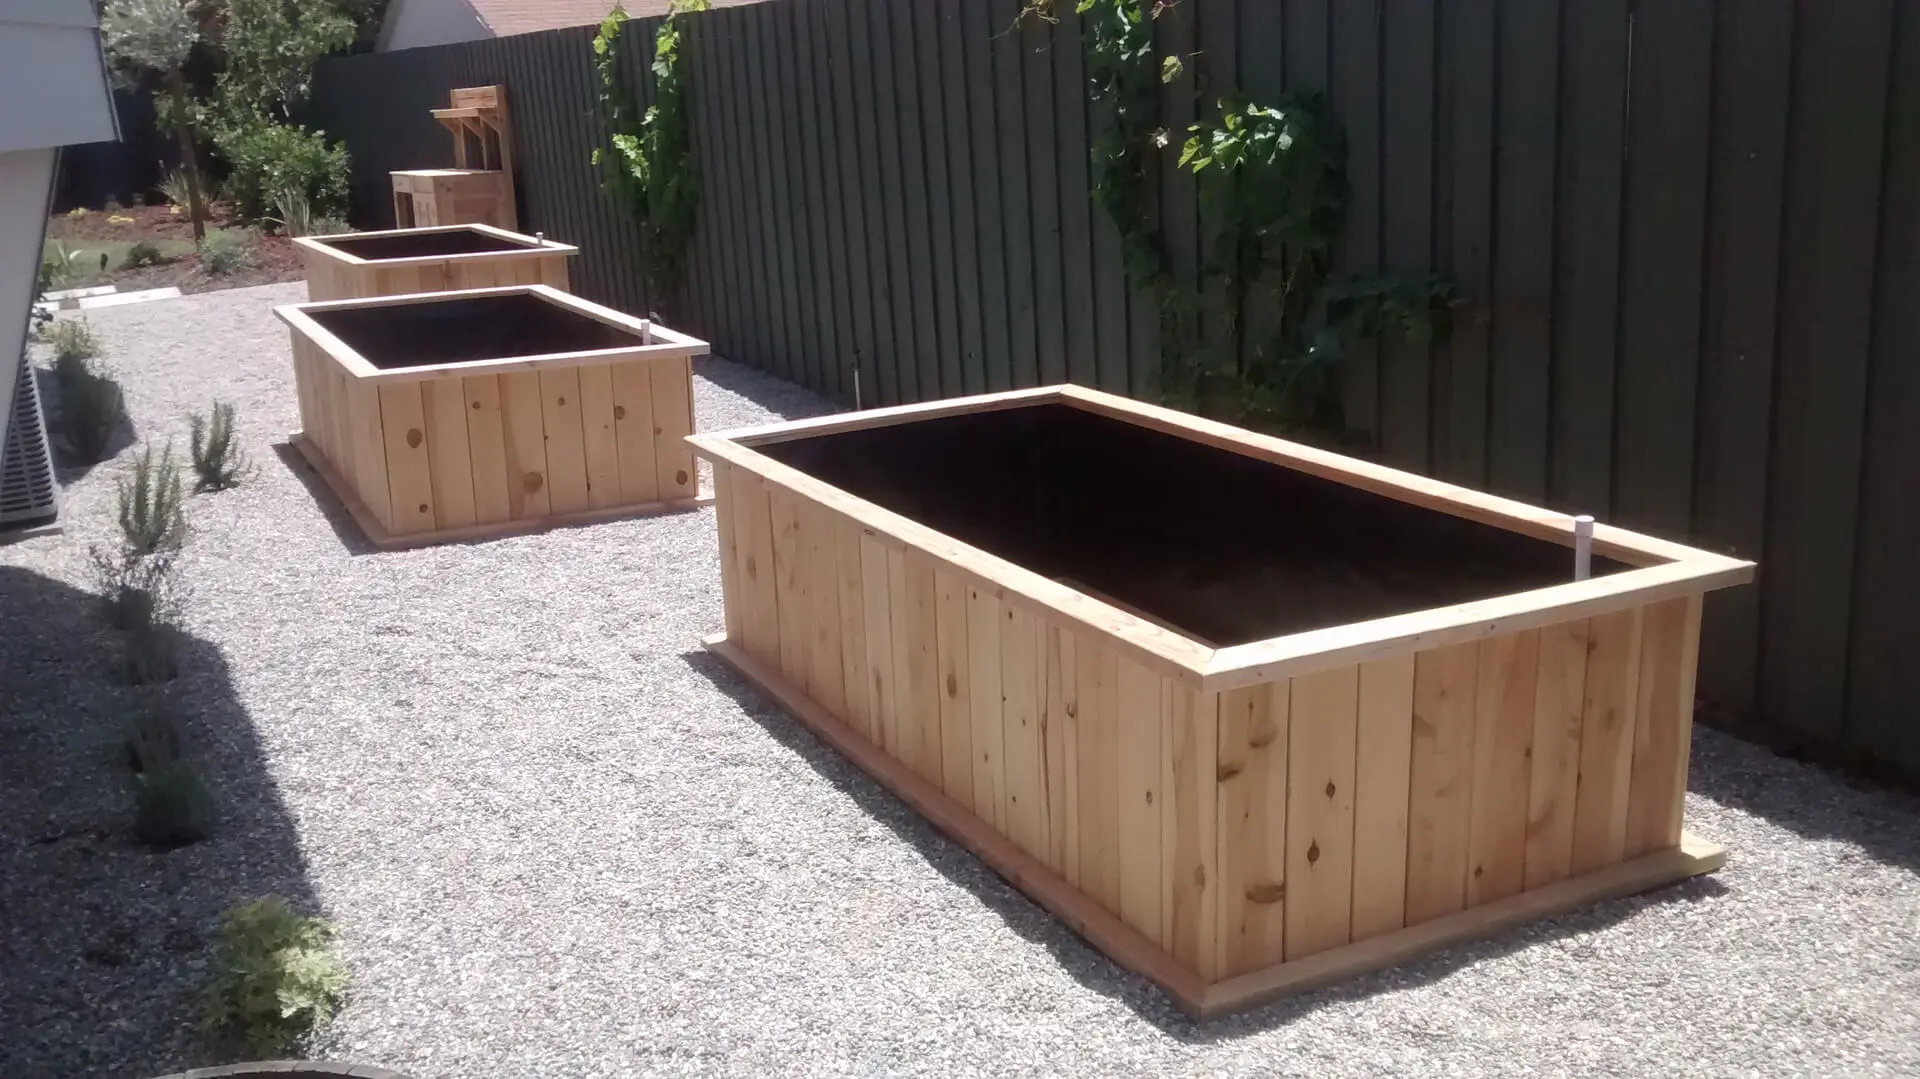 Three wooden planters in a gravel yard.